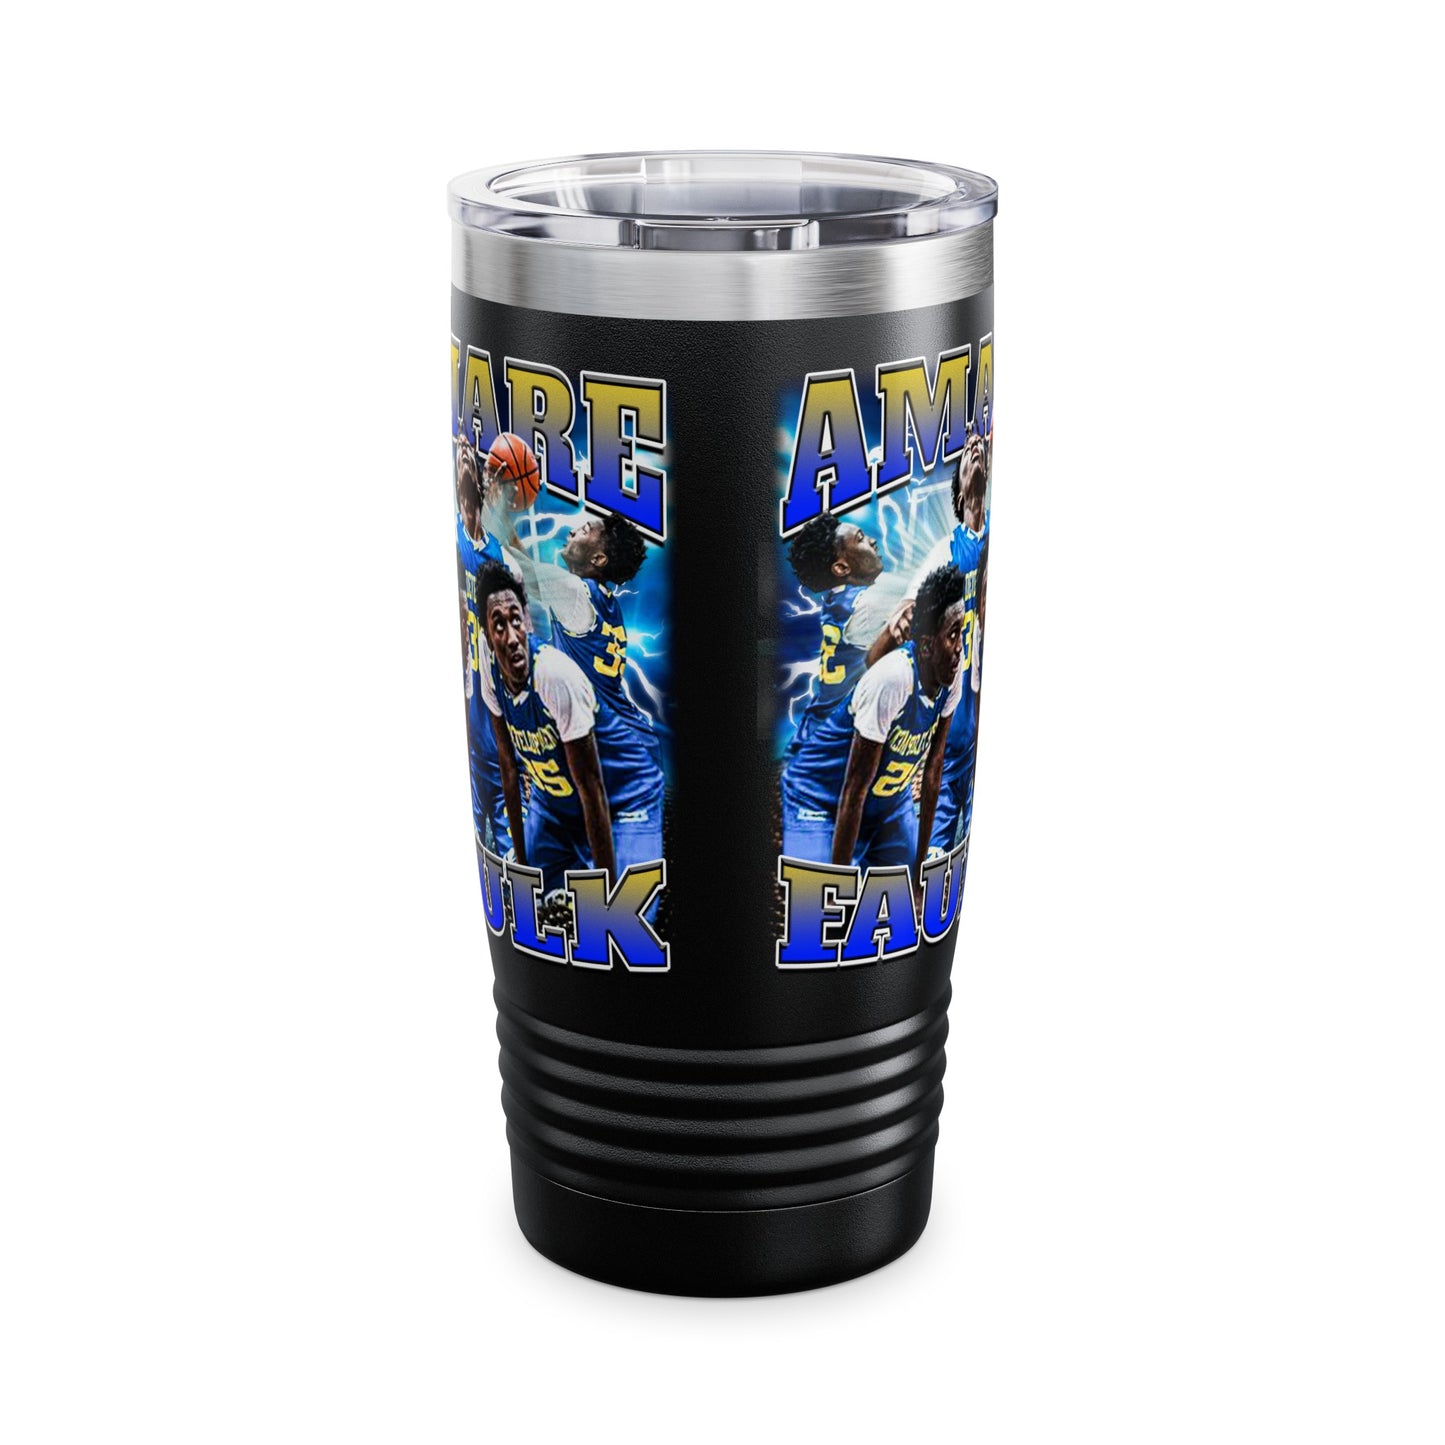 Amare Faulk Stainless Steal Tumbler